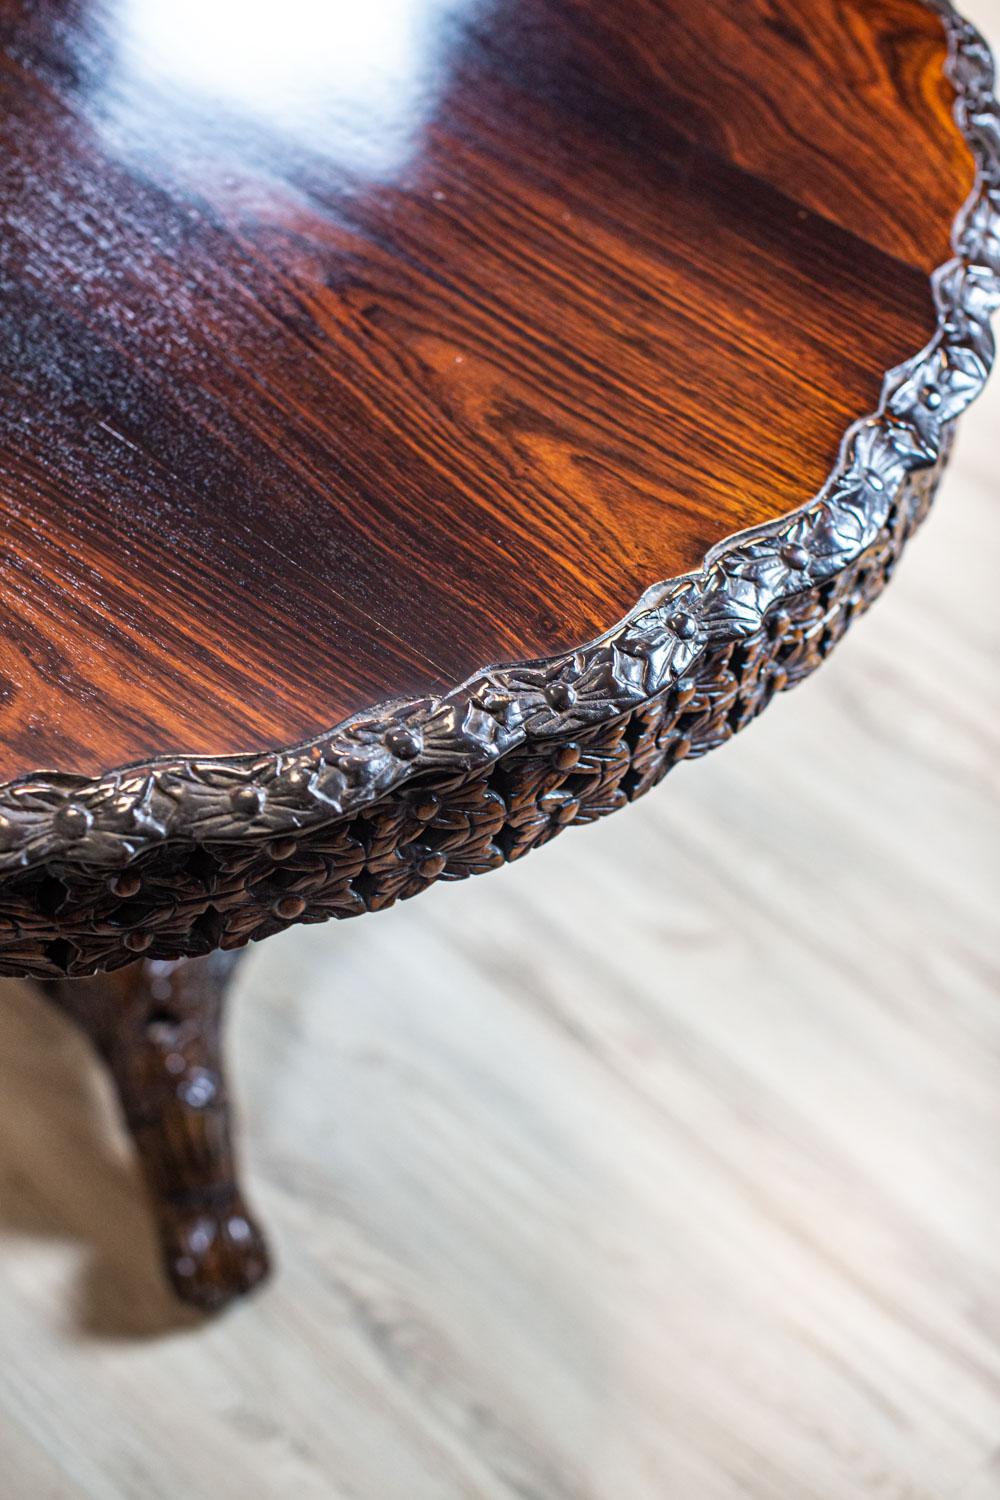 Decorative Rosewood Table from the Turn of the 19th and 20th Centuries For Sale 3